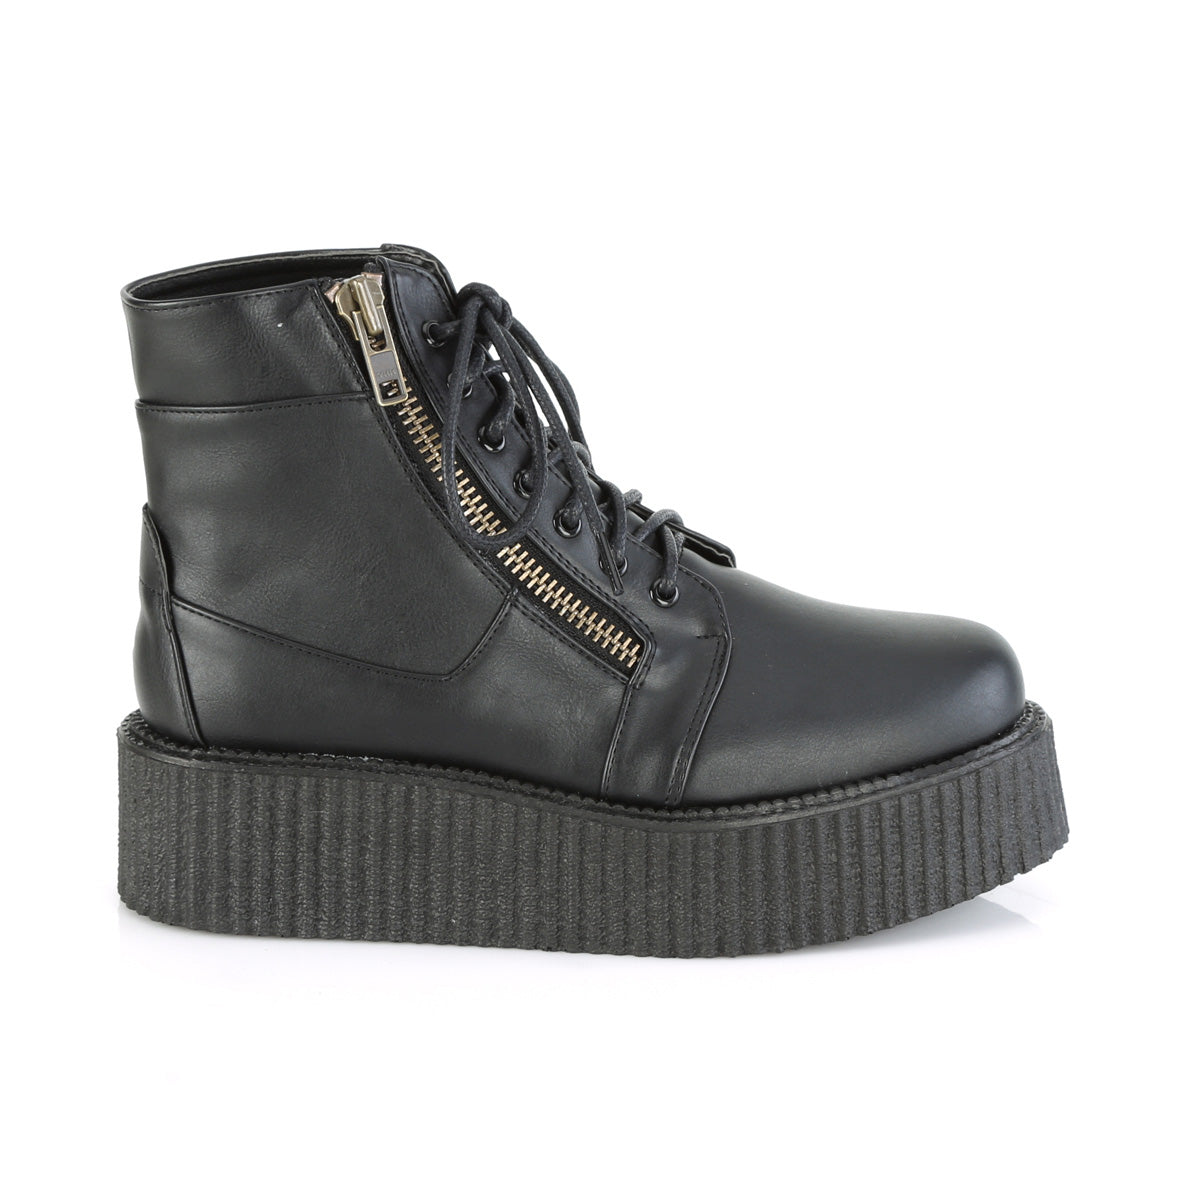 Lace-Up Boots with 2-inch Platform V-CREEPER-571 – FantasiaWear